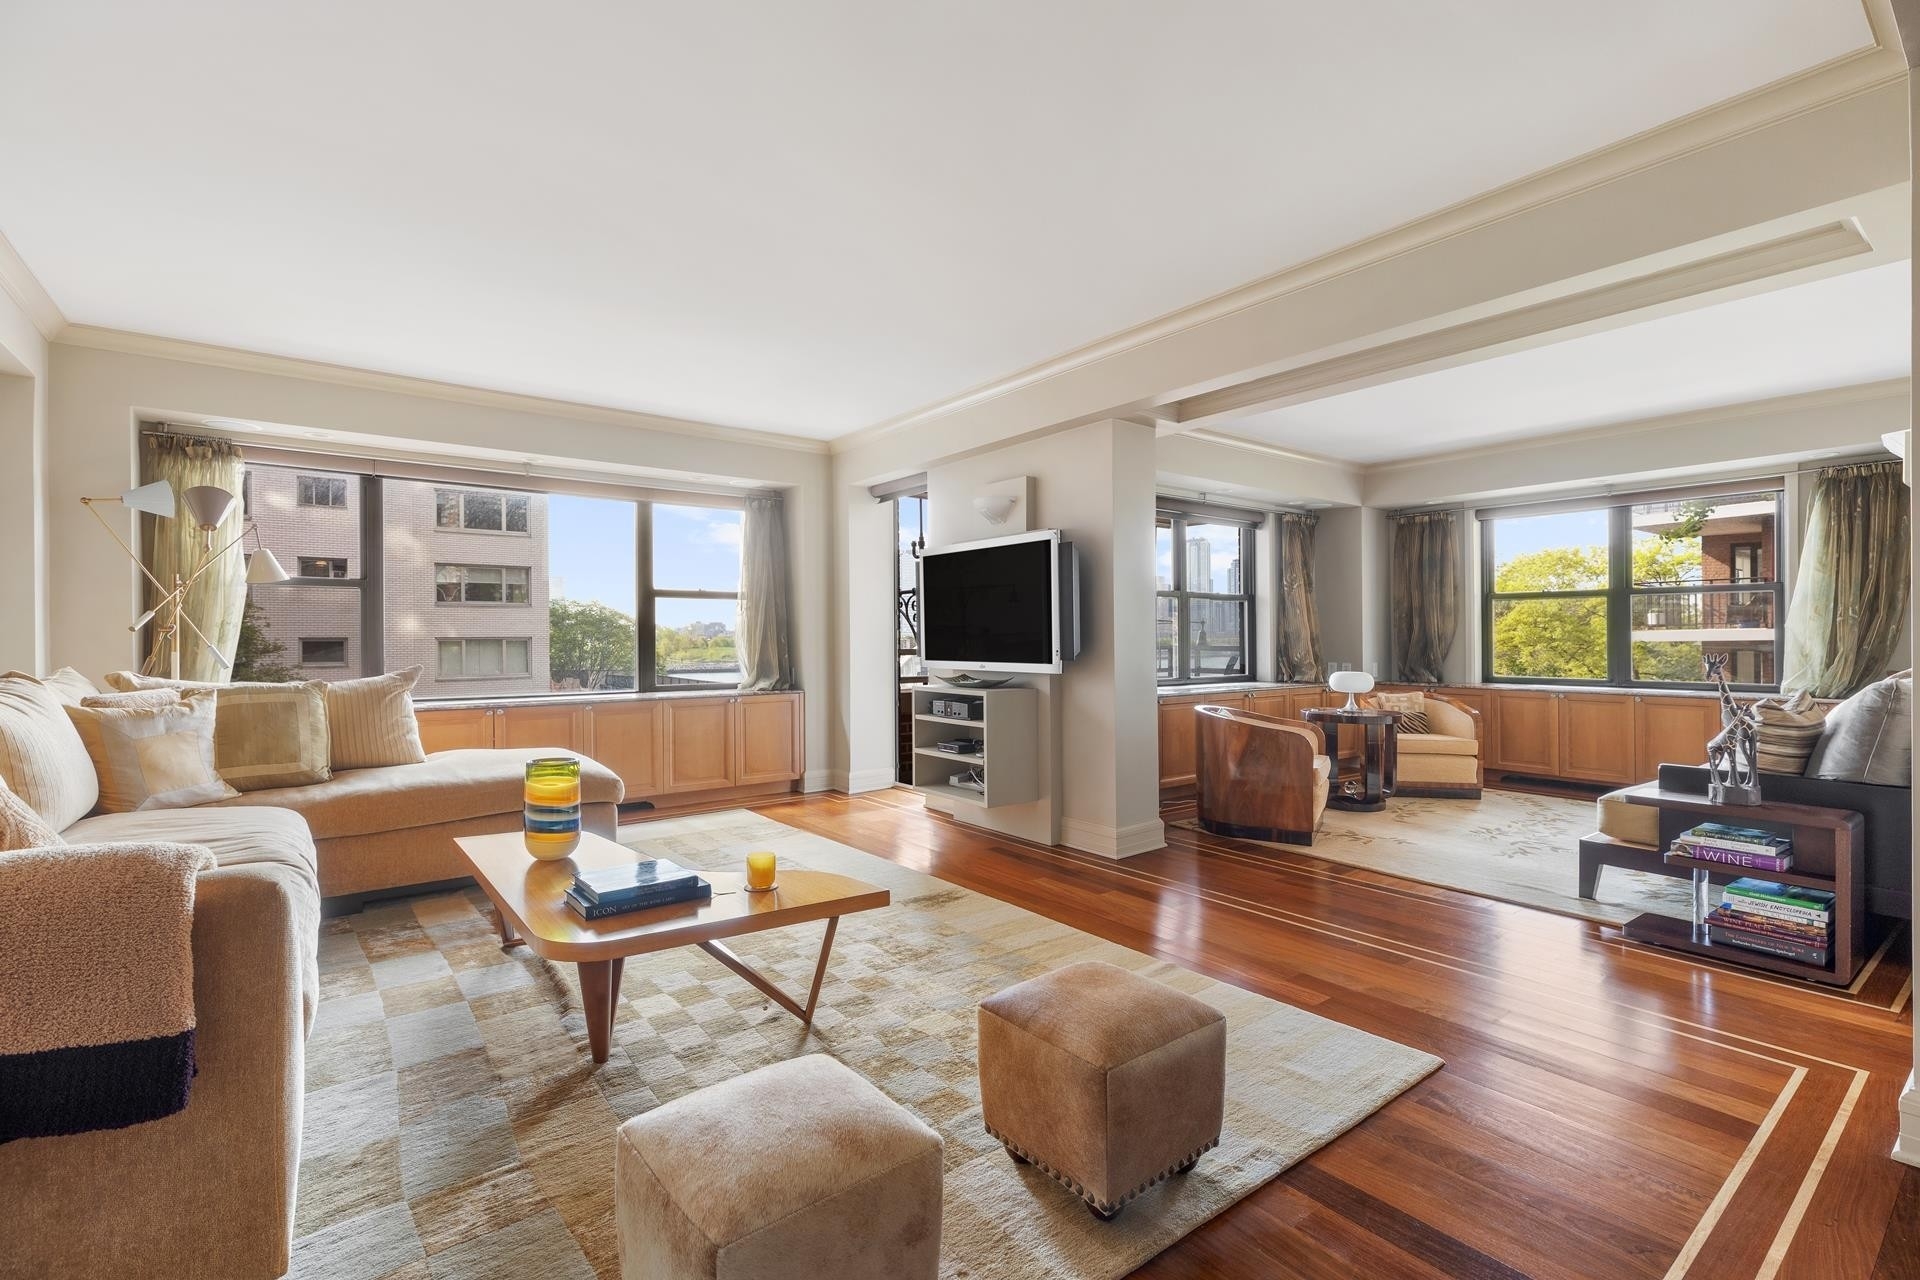 Co-op Properties for Sale at 50 SUTTON PL S, 3J Sutton Place, New York, NY 10022